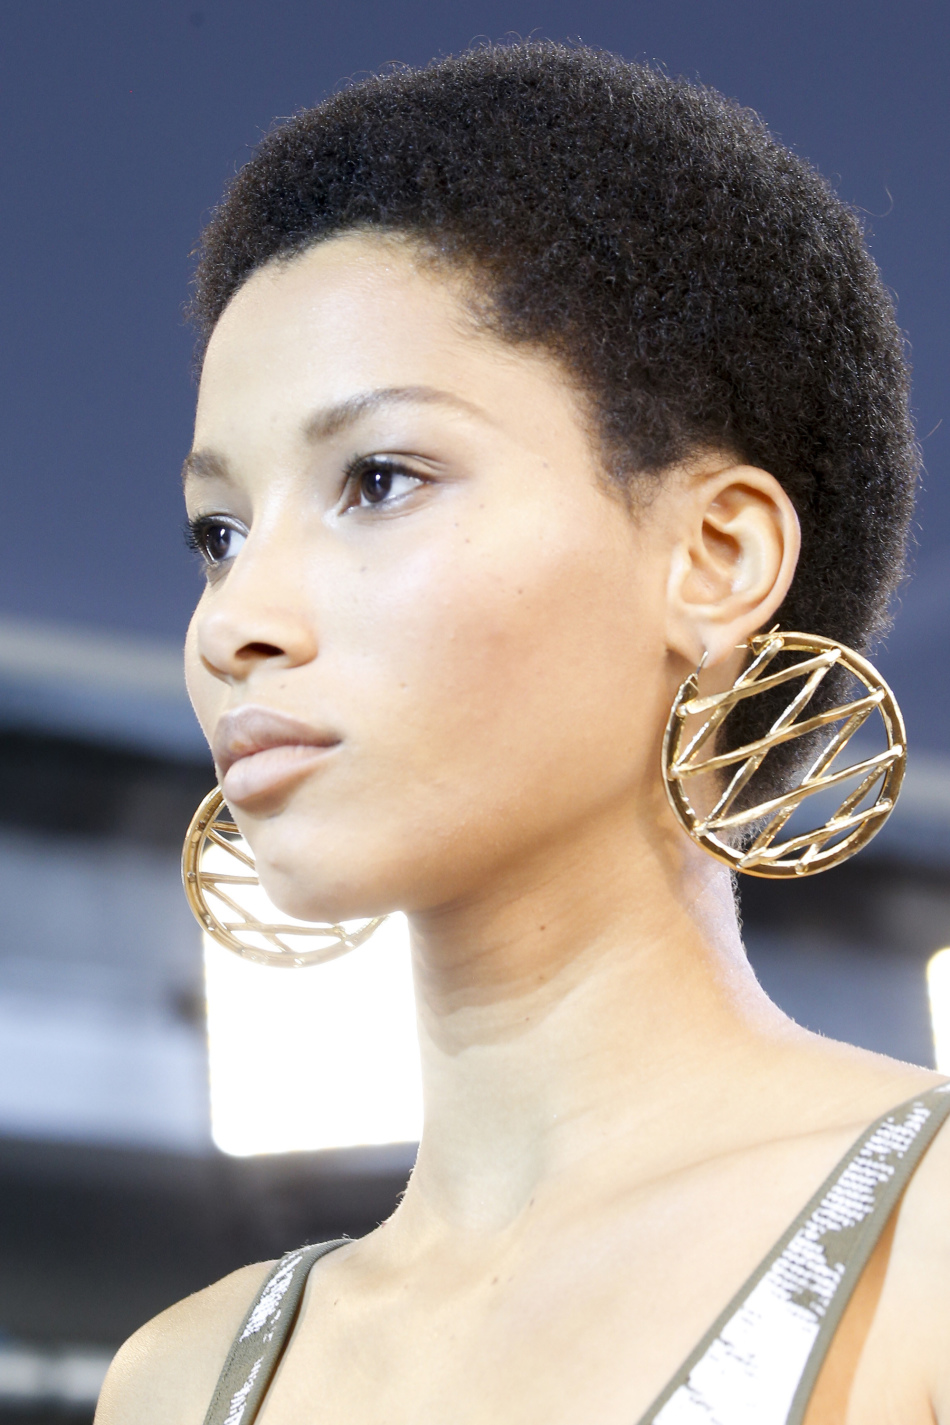 Large Congo earrings for 2022-2023 with a filled space inside